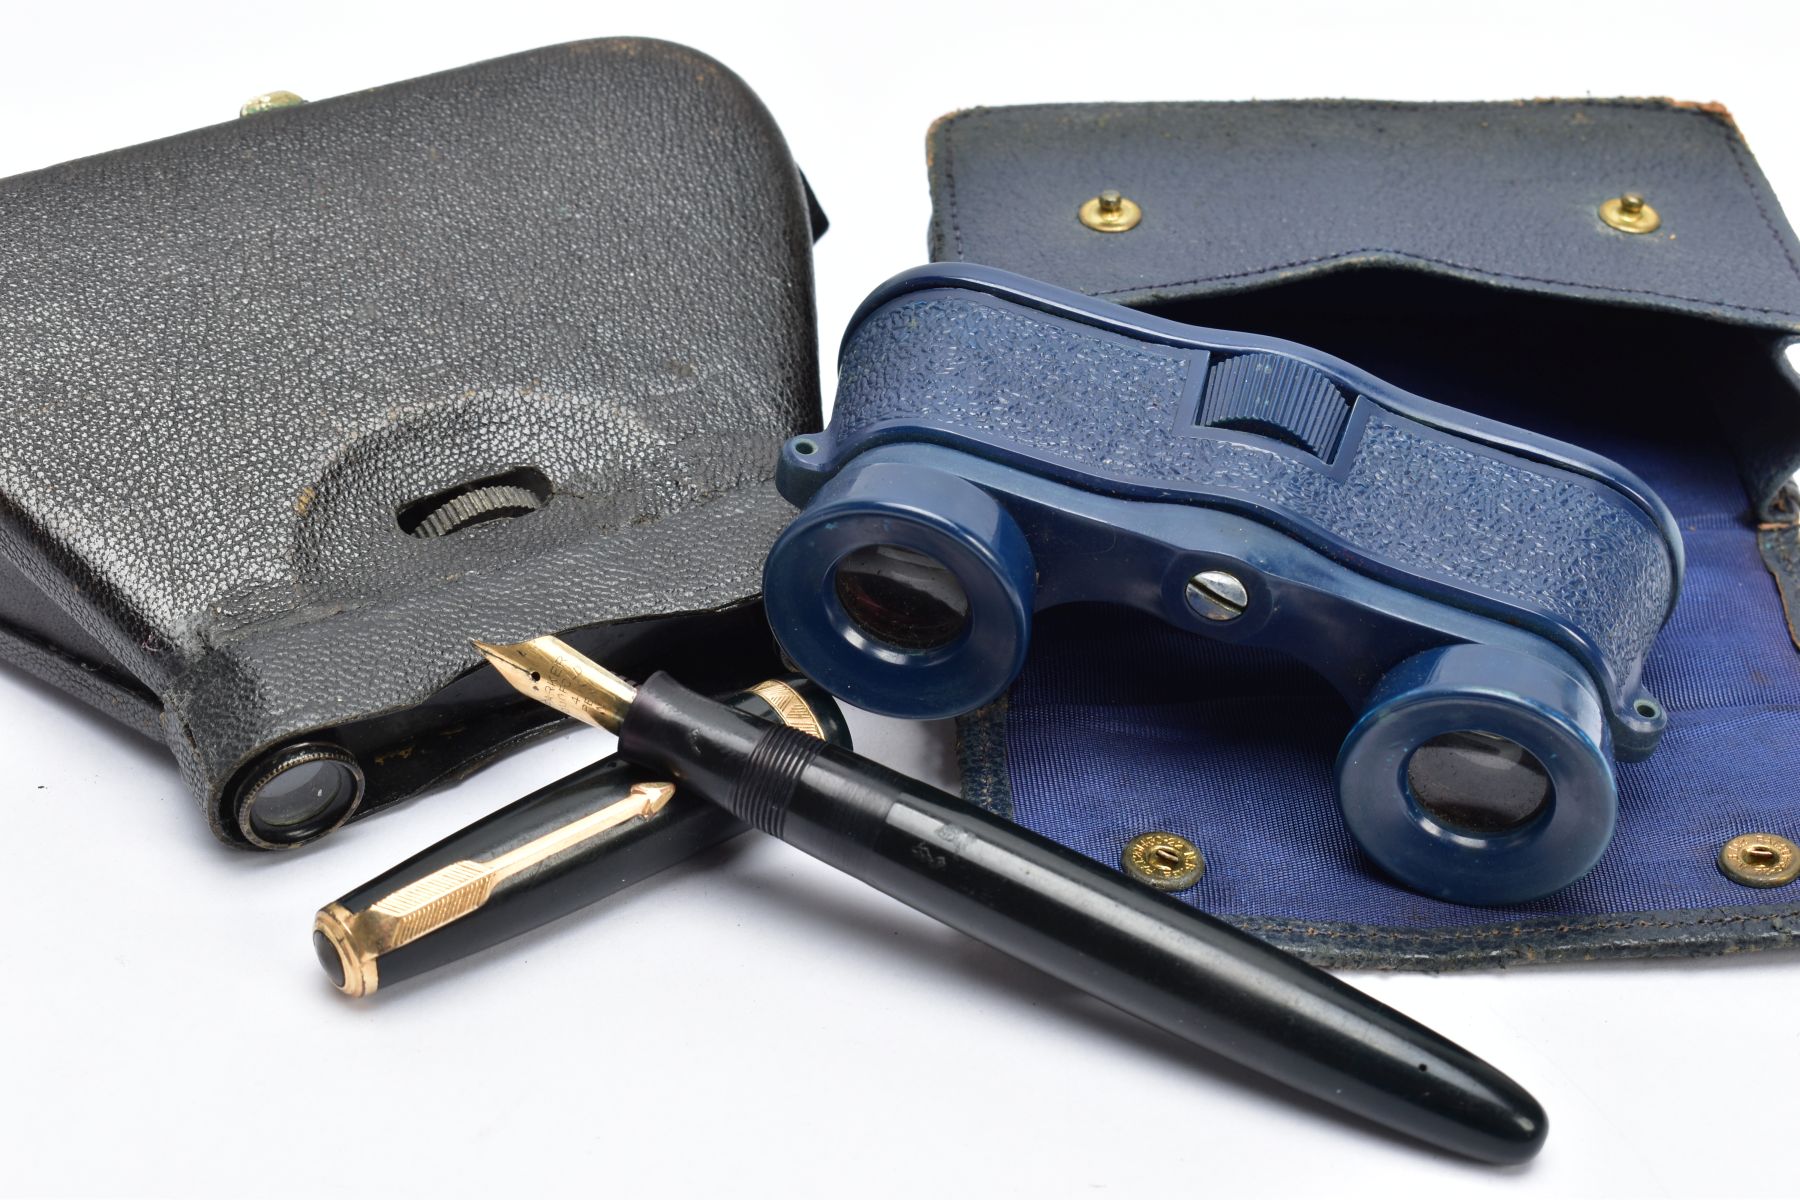 TWO PAIRS OF OPERA GLASSES AND A PARKER FOUNTAIN PEN, a cased pair of blue Kershaw opera glasses, - Image 4 of 4